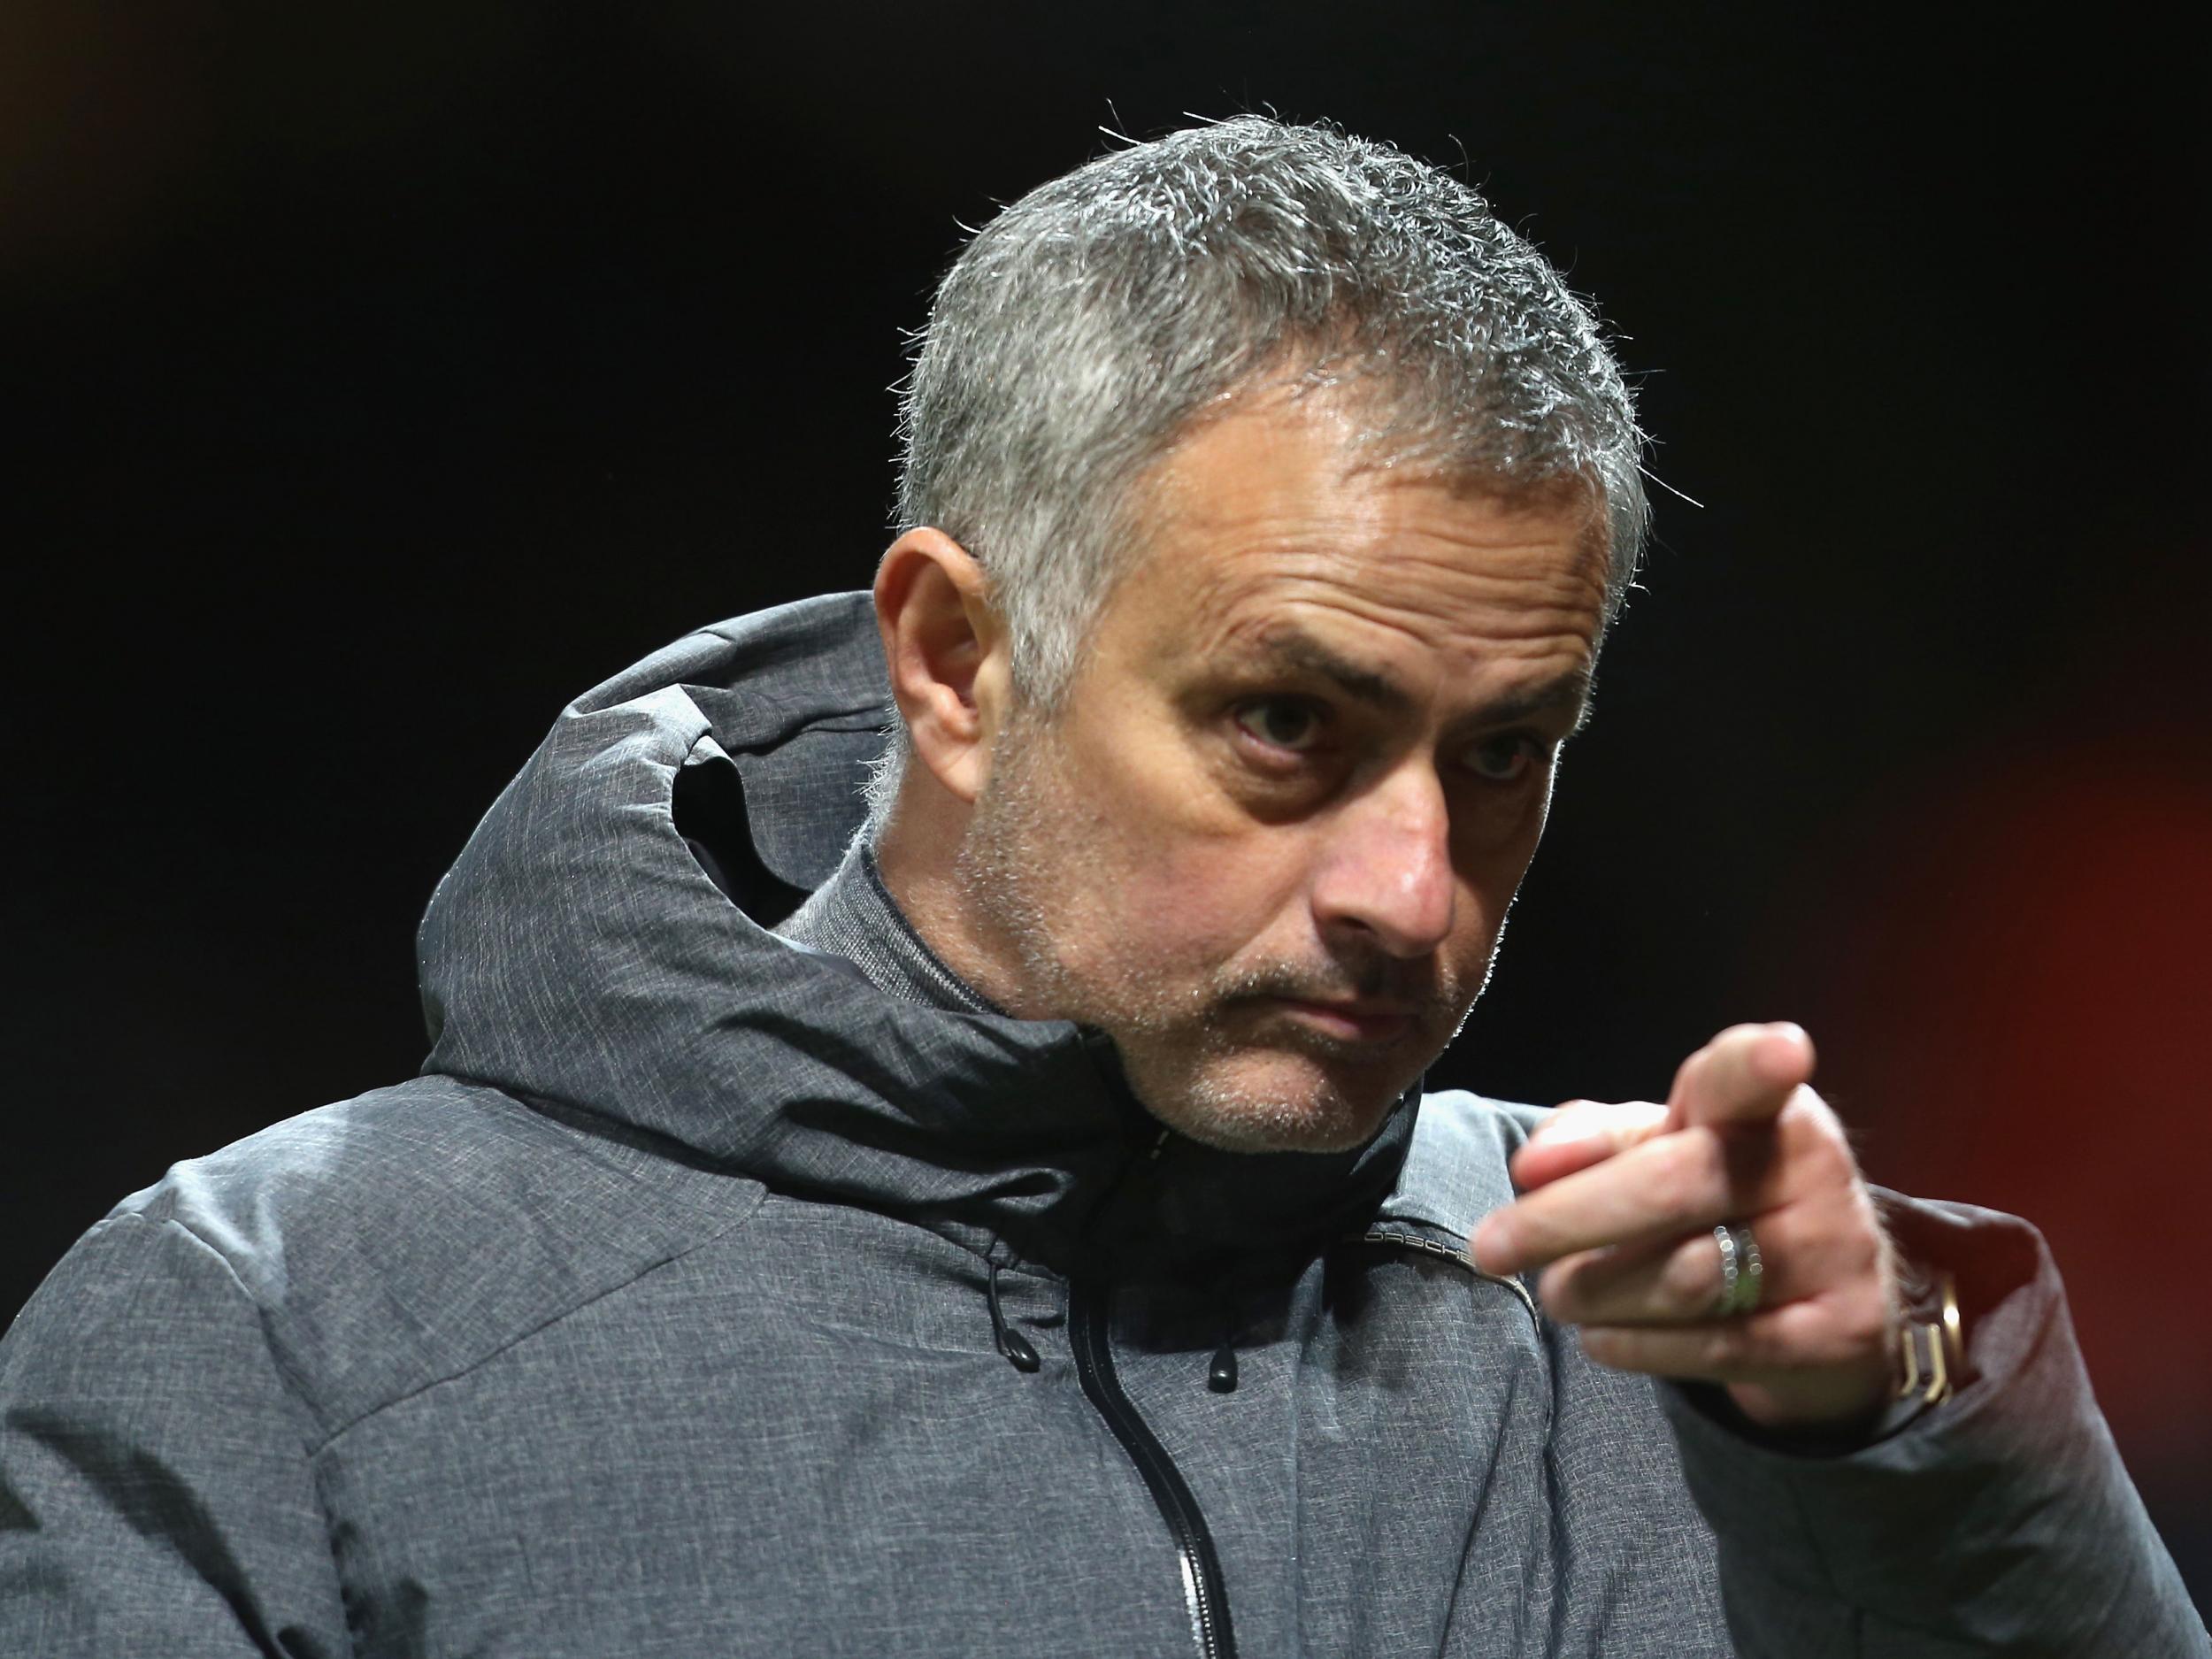 Jose Mourinho insisted that Manchester United tell 'the truth' about injuries